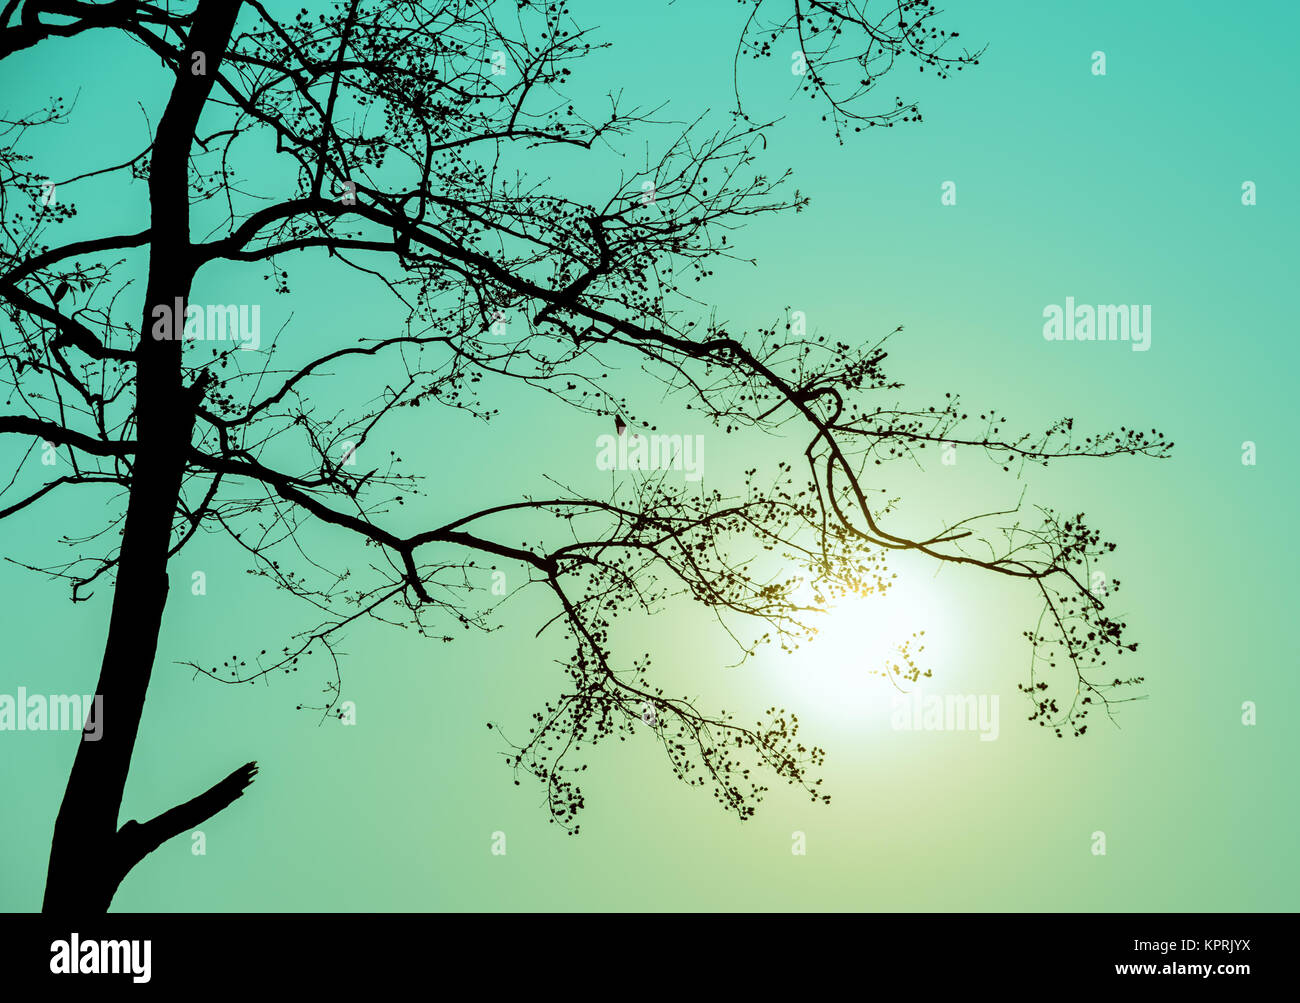 Silhouette tree branch in green background Stock Photo